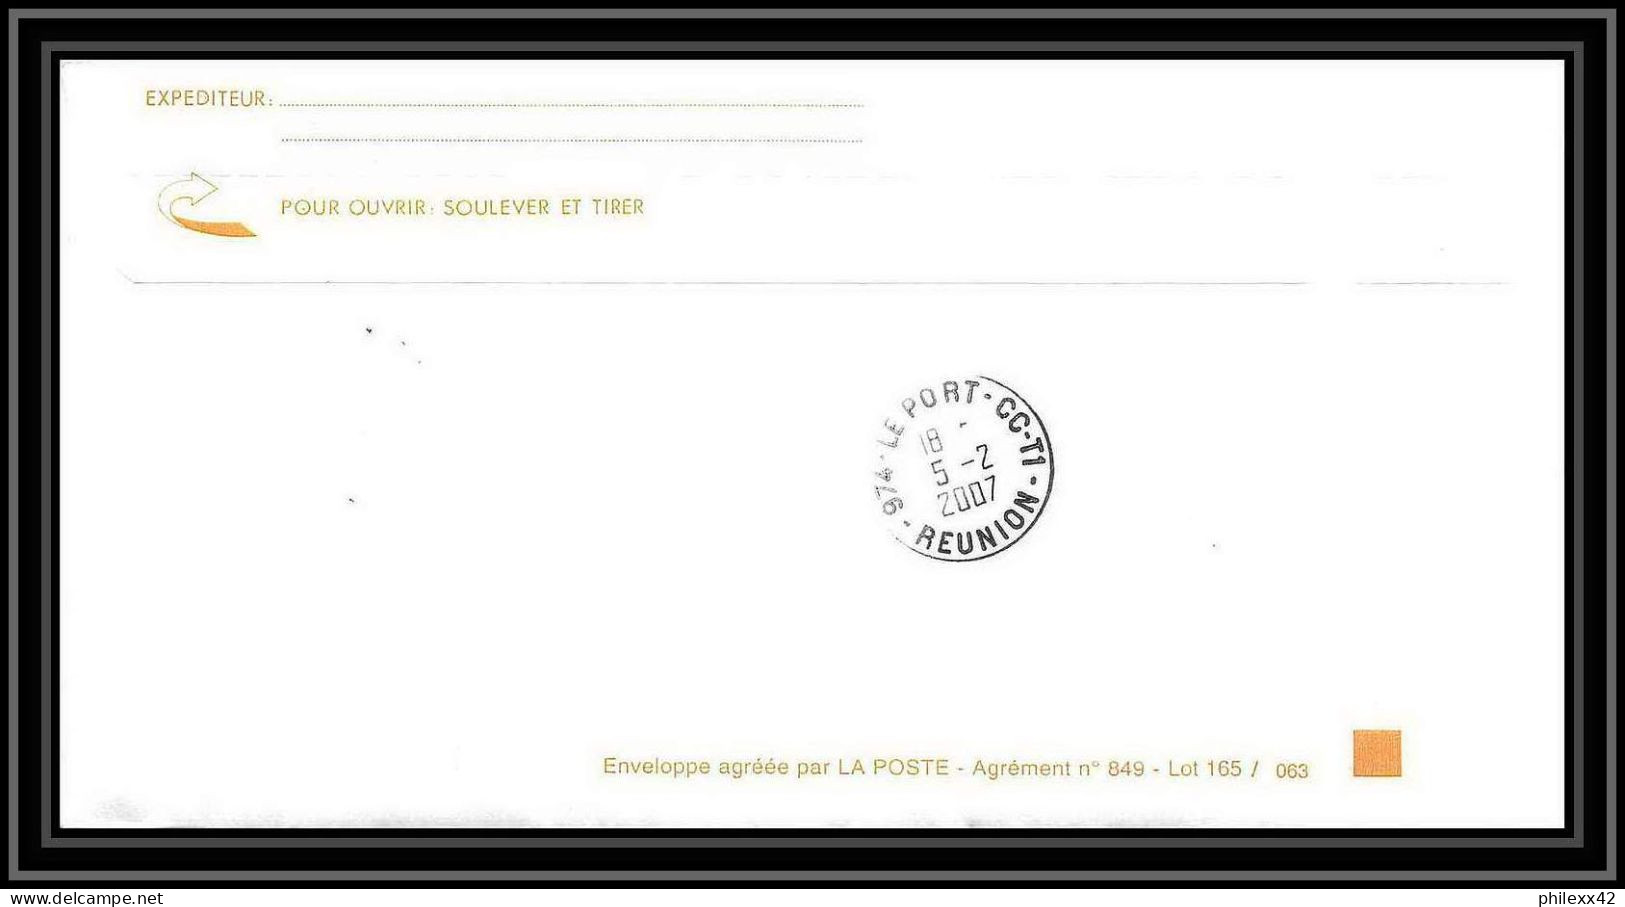 2652 ANTARCTIC Terres Australes TAAF Lettre Cover Dufresne 2 Md 158 Cape Town 5/2/2007 N°430 Possession Reunion - Antarctic Expeditions